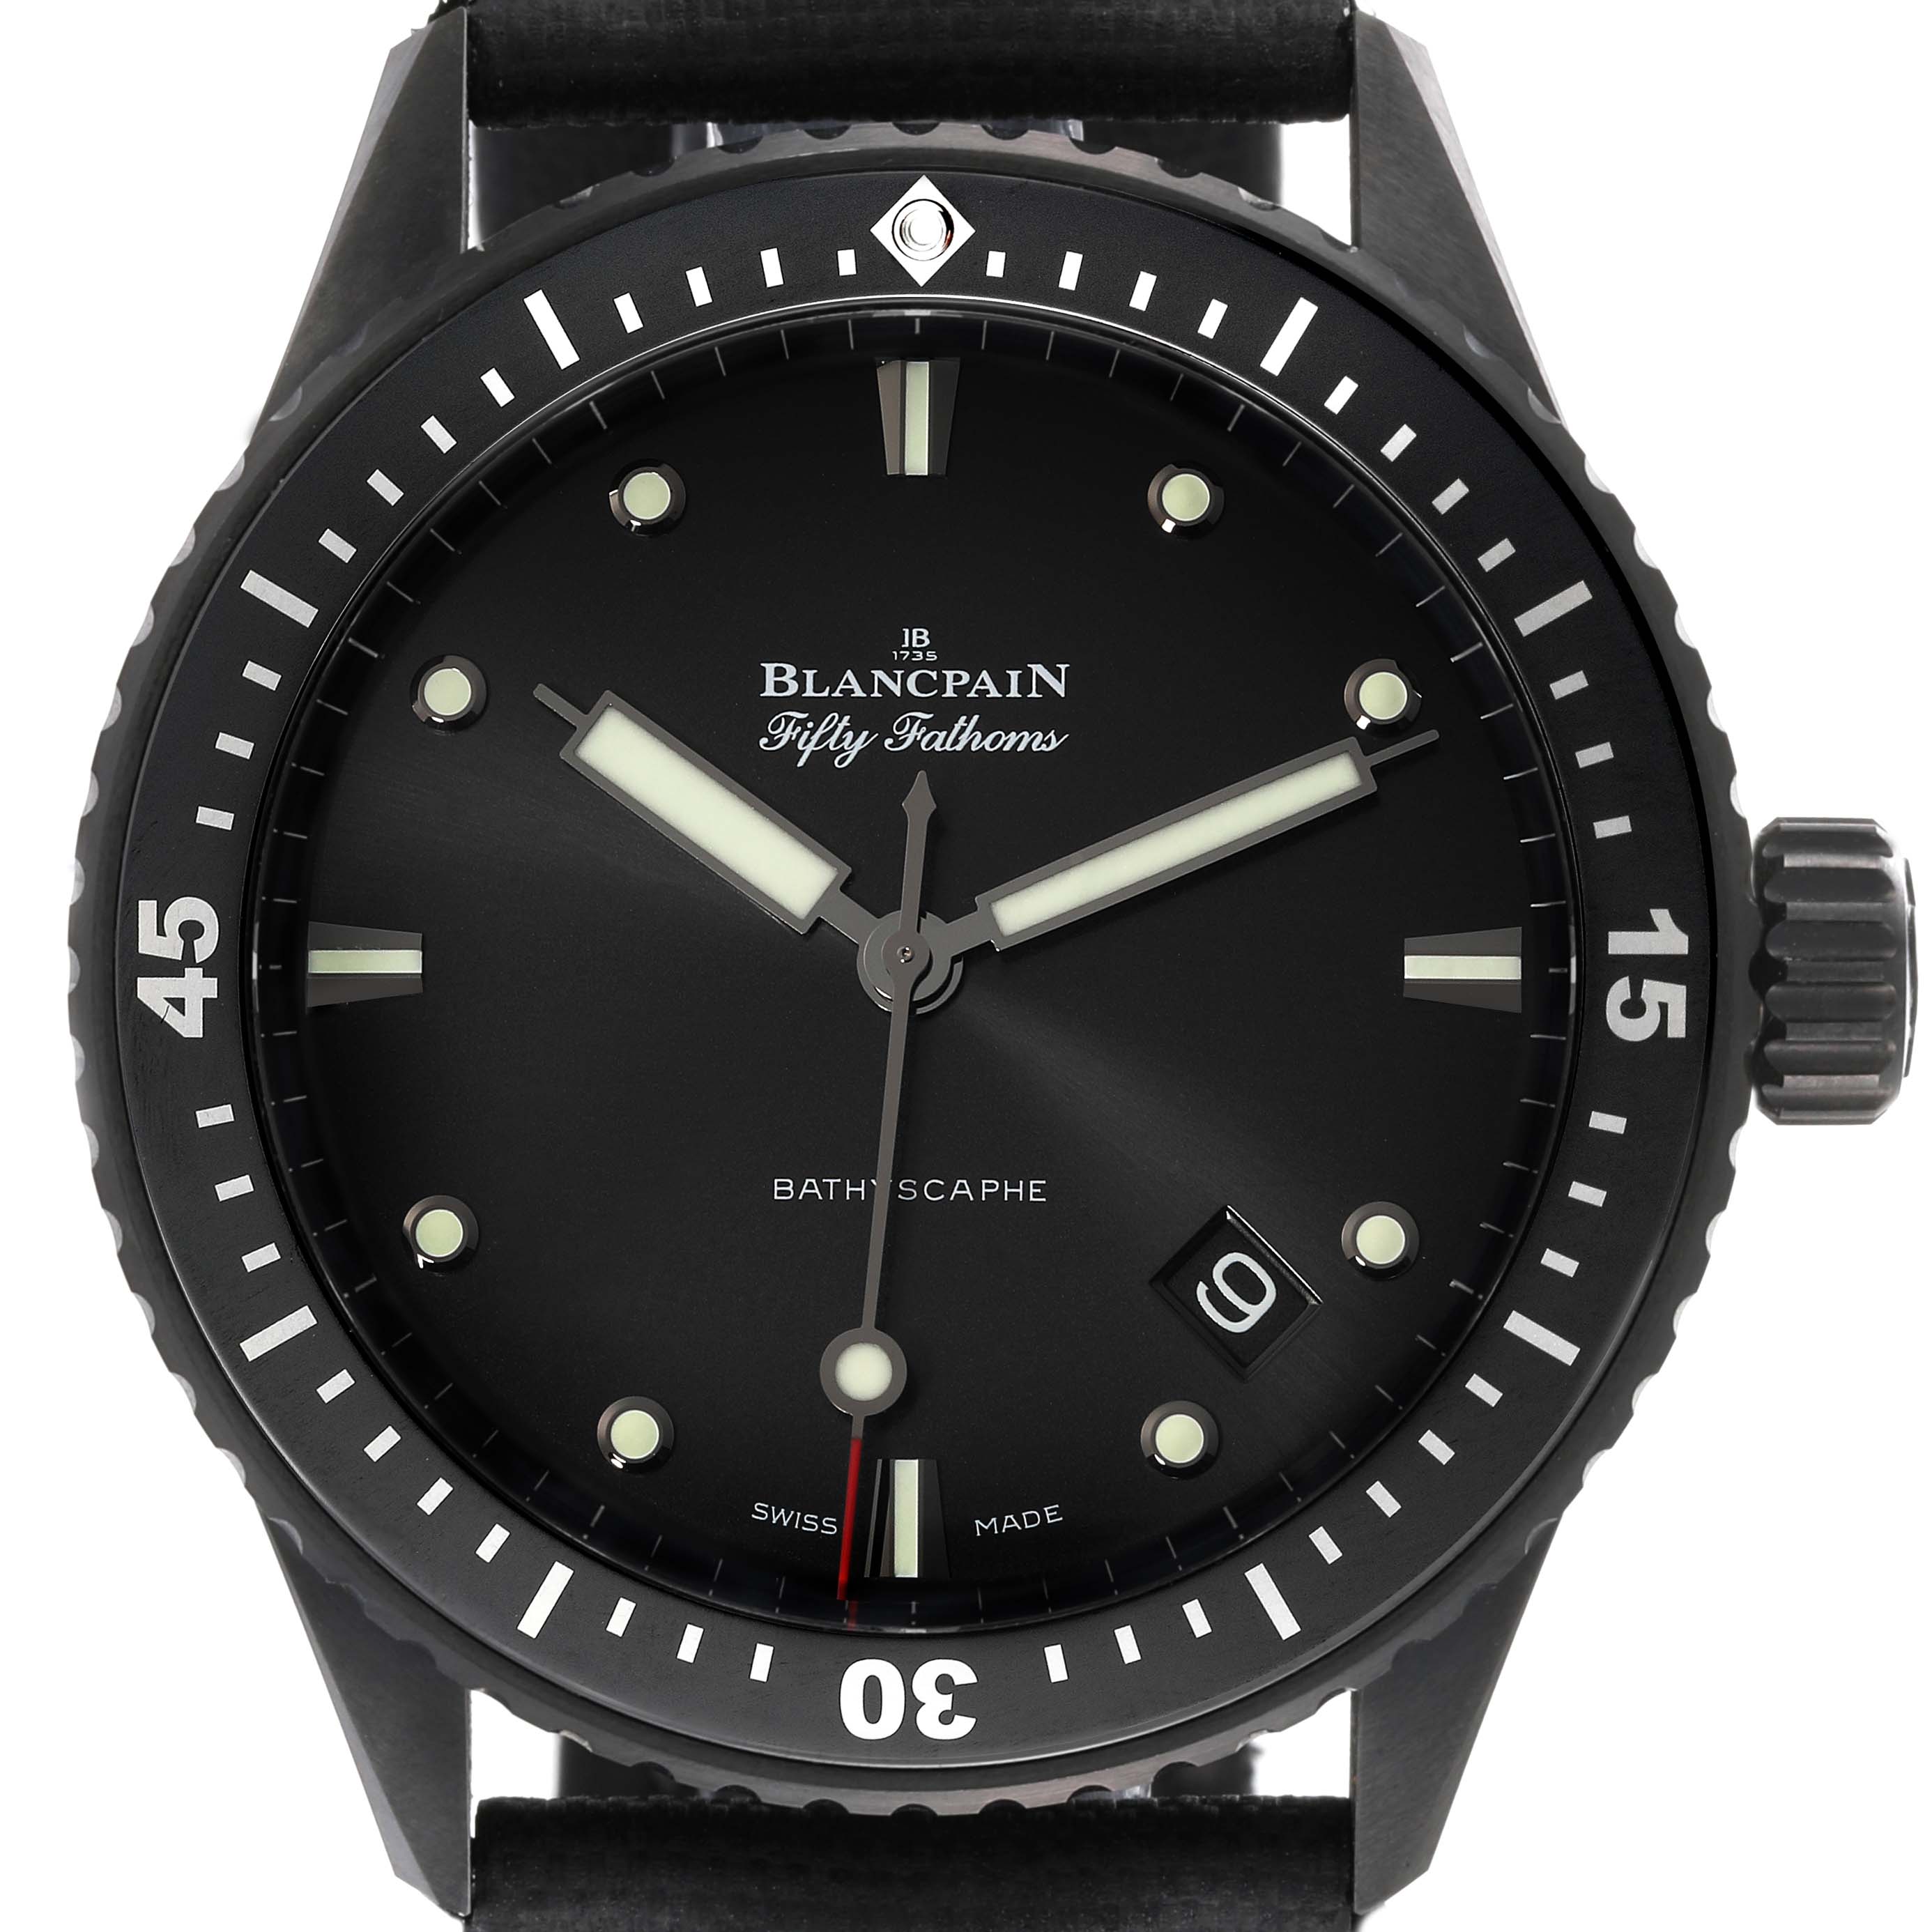 Blancpain Fifty Fathoms strap for sale Custom made